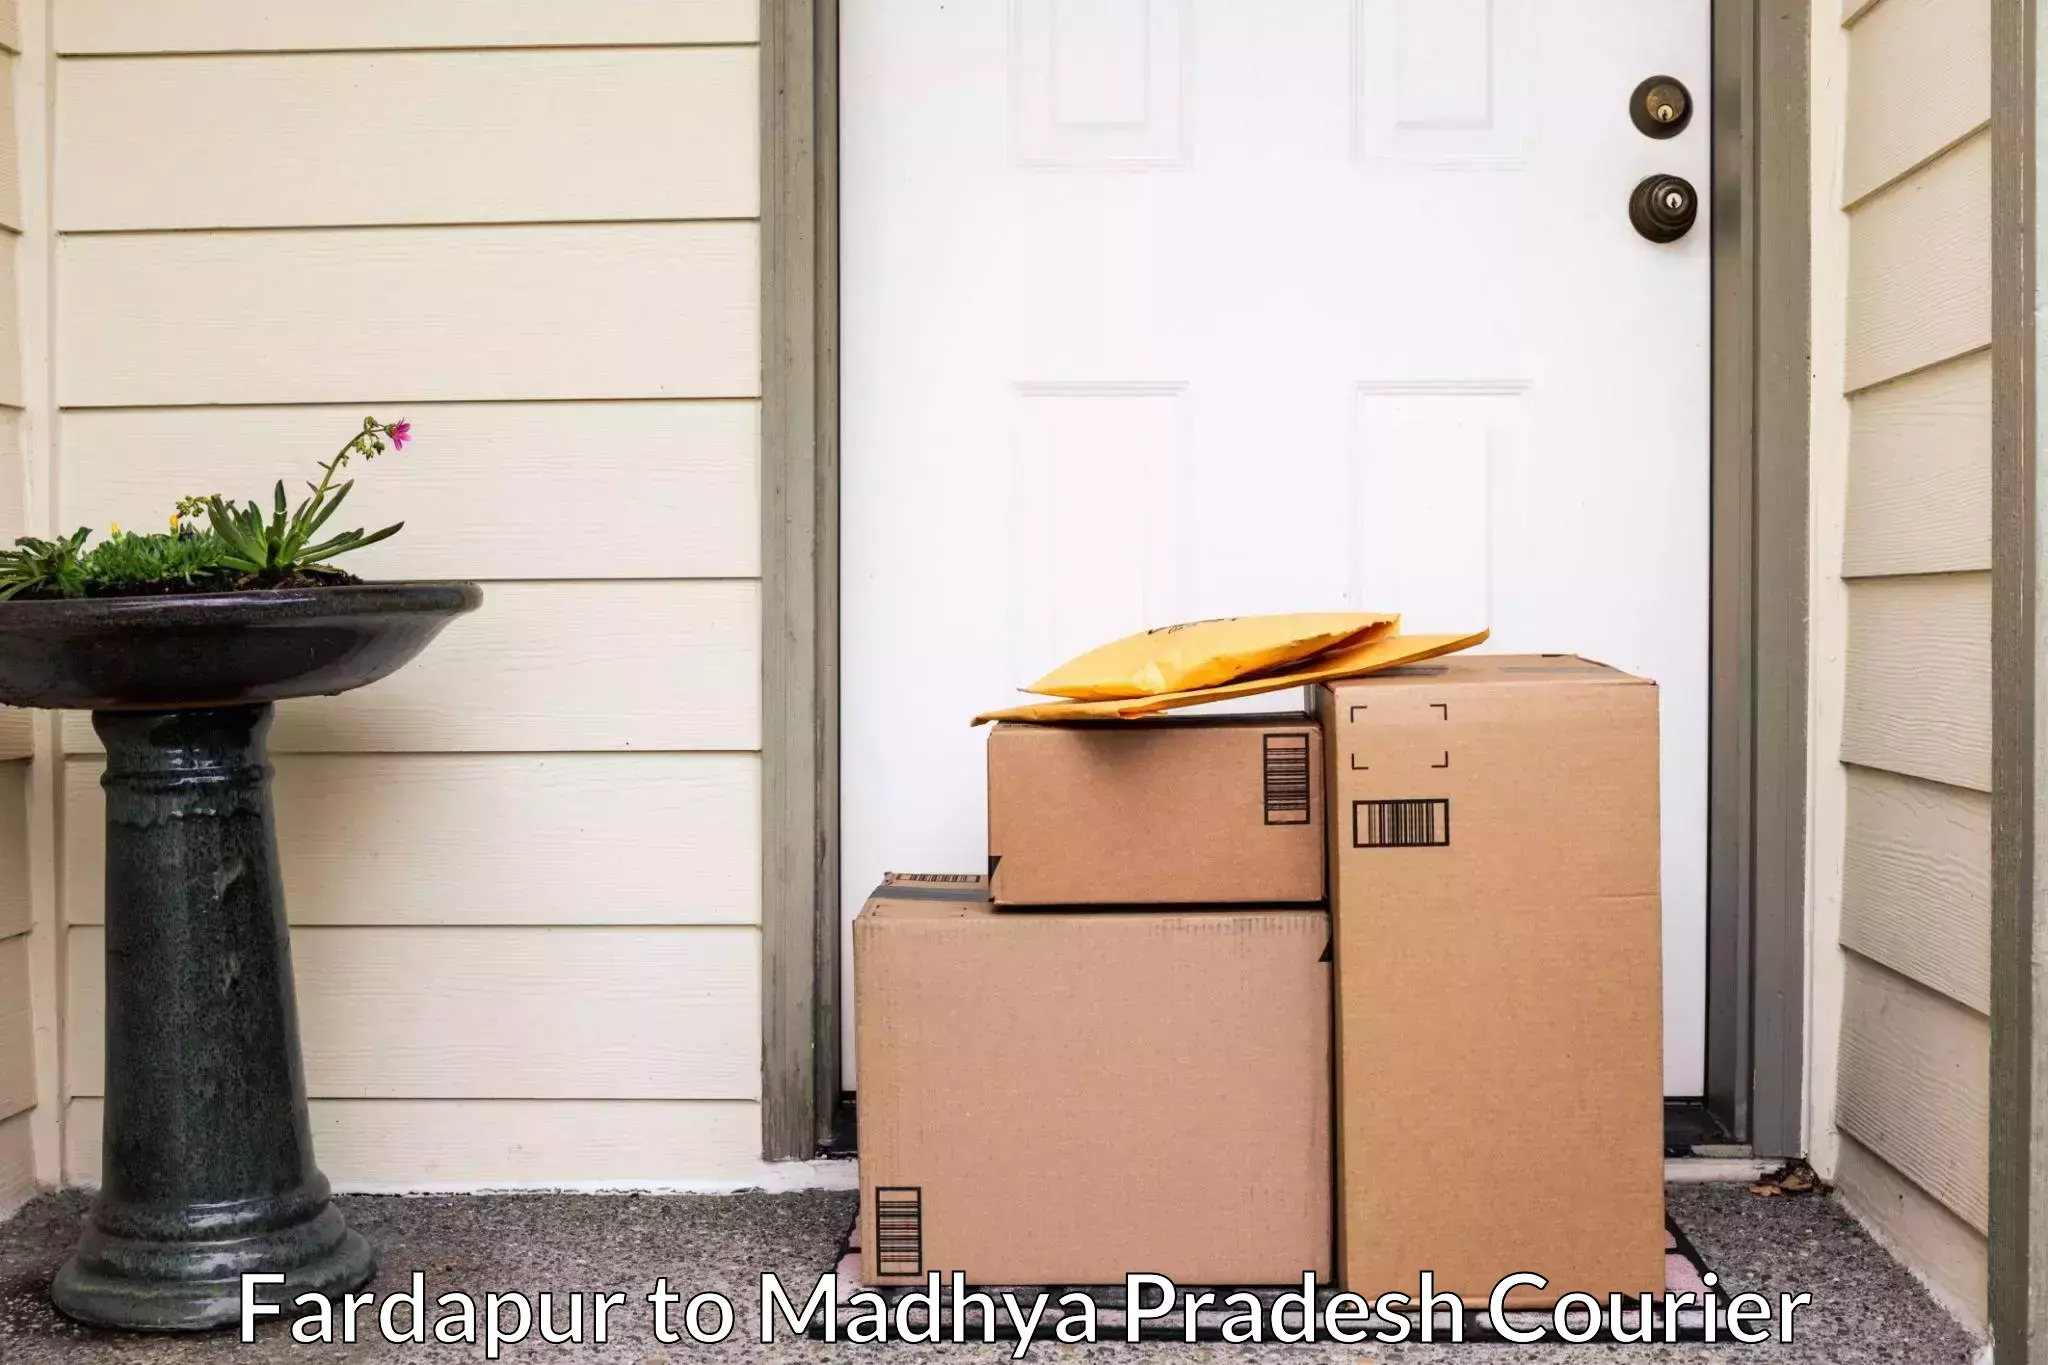 High-quality moving services Fardapur to Maheshwar